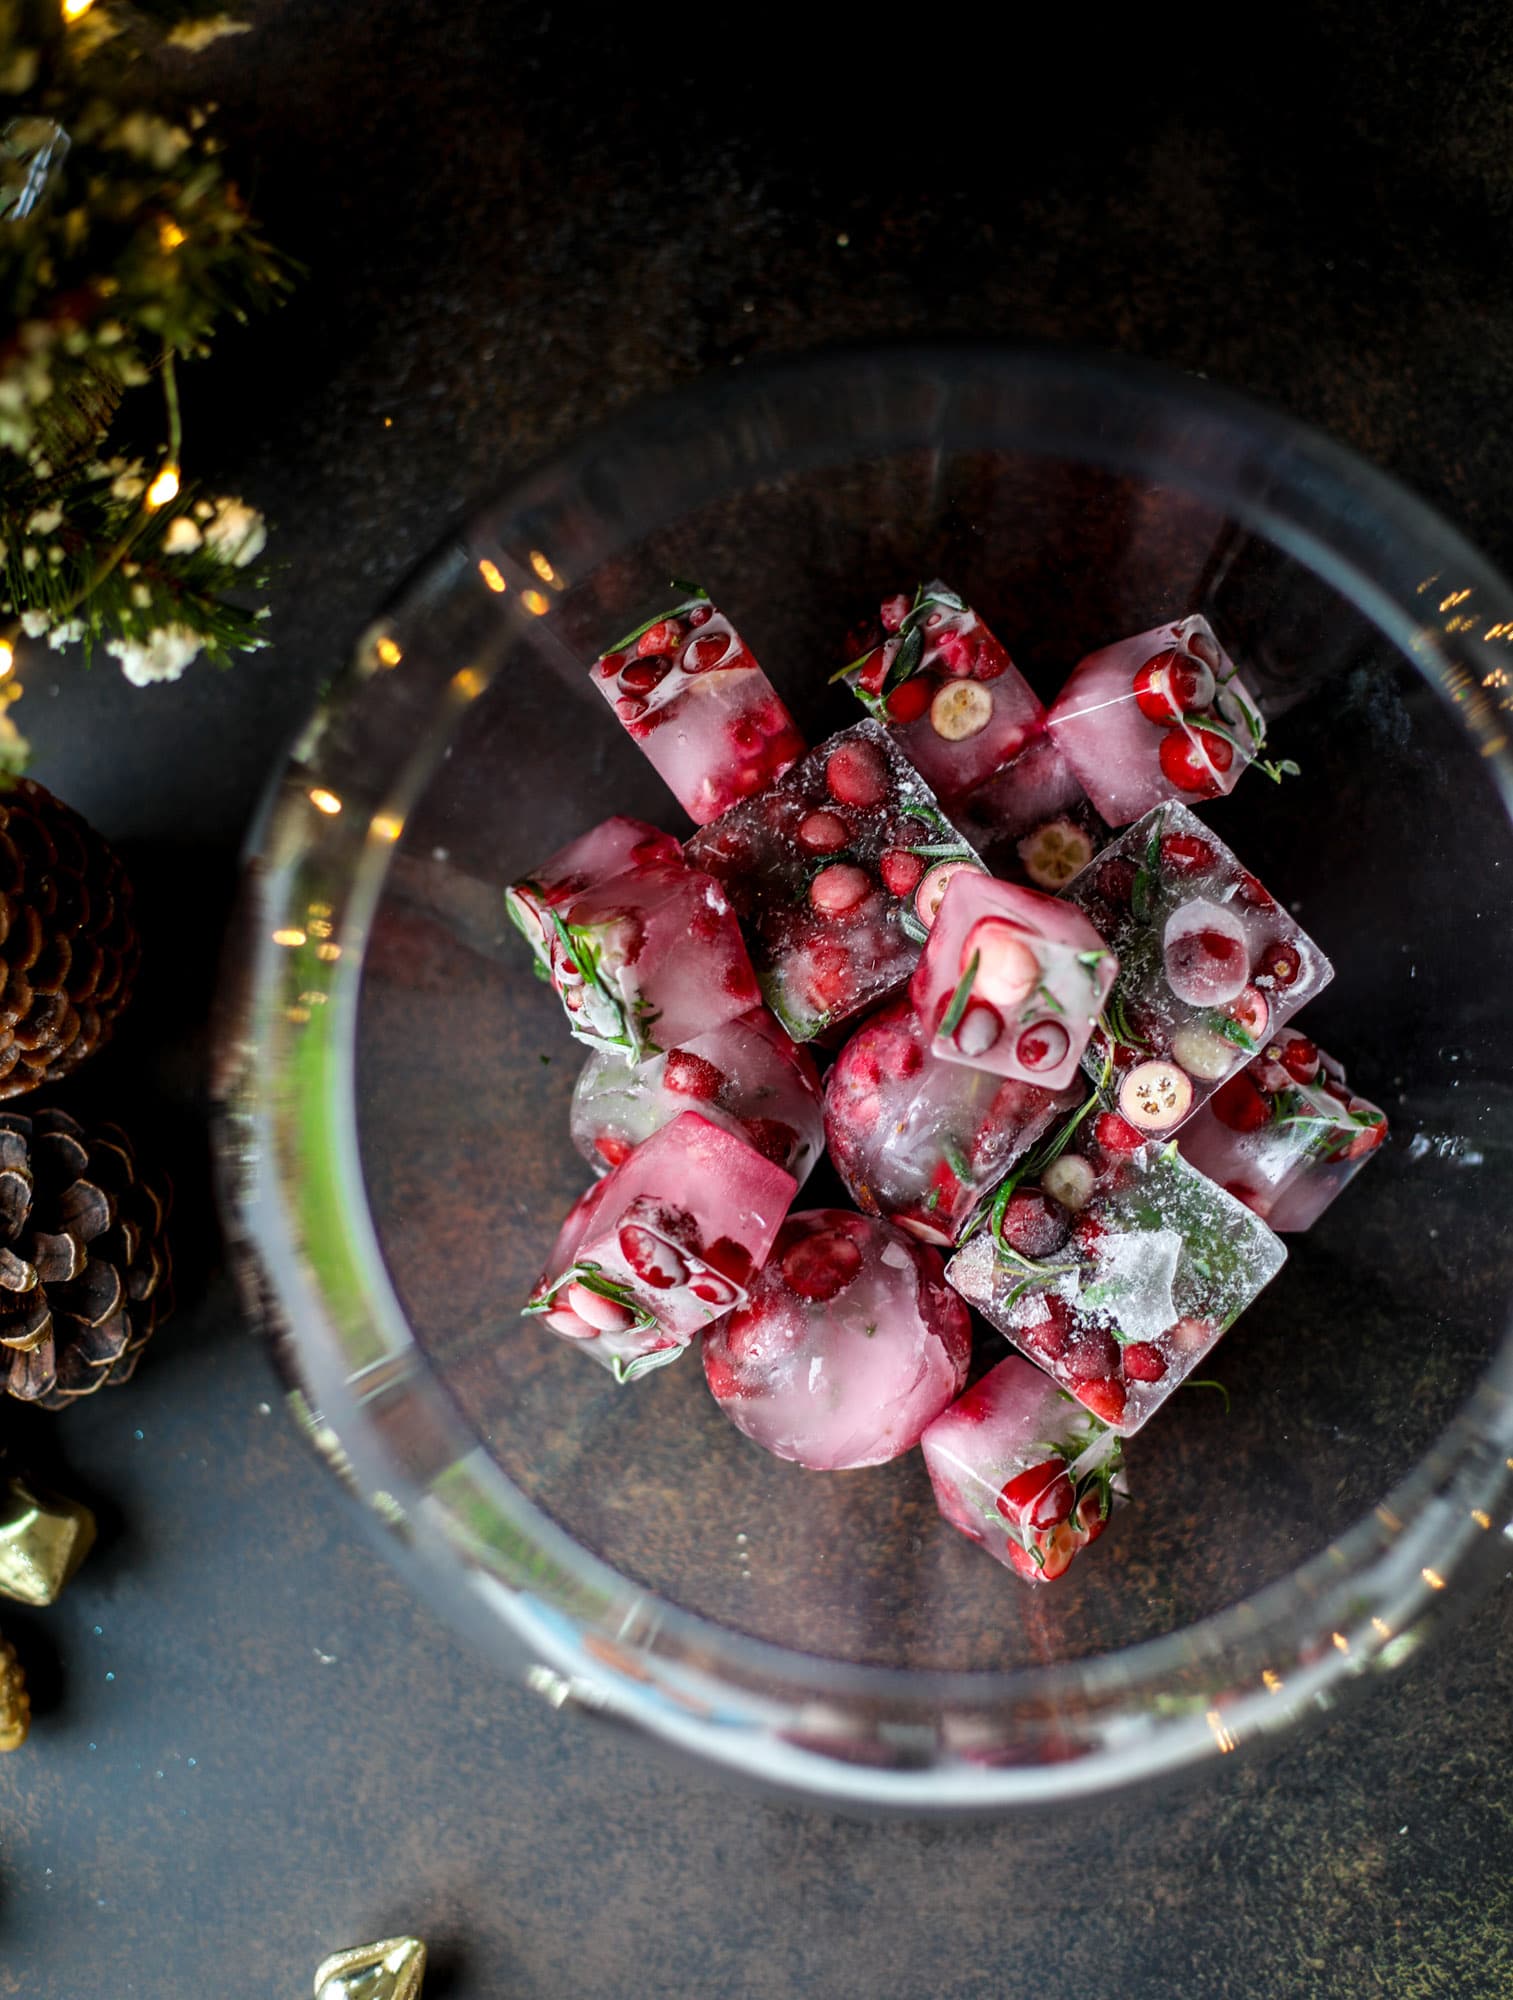 This tree trimming punch is the most perfect christmas punch to drink while decorating the tree! Rich red wine is the base and there's a bit of orange, some spice, cinnamon and a gorgeous jeweled holiday ice cubes! I howsweeteats.com #christmas #punch